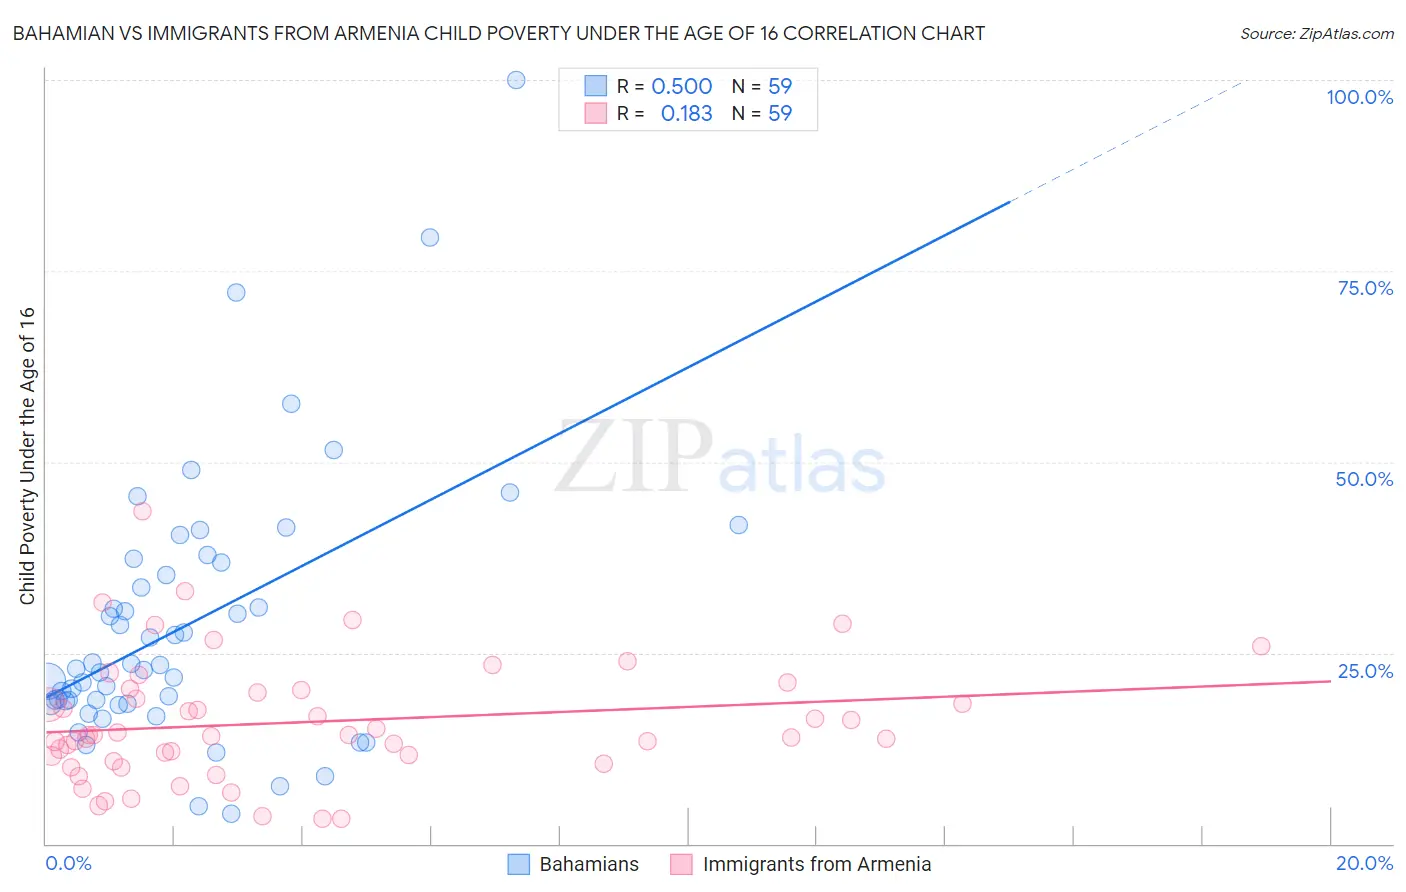 Bahamian vs Immigrants from Armenia Child Poverty Under the Age of 16